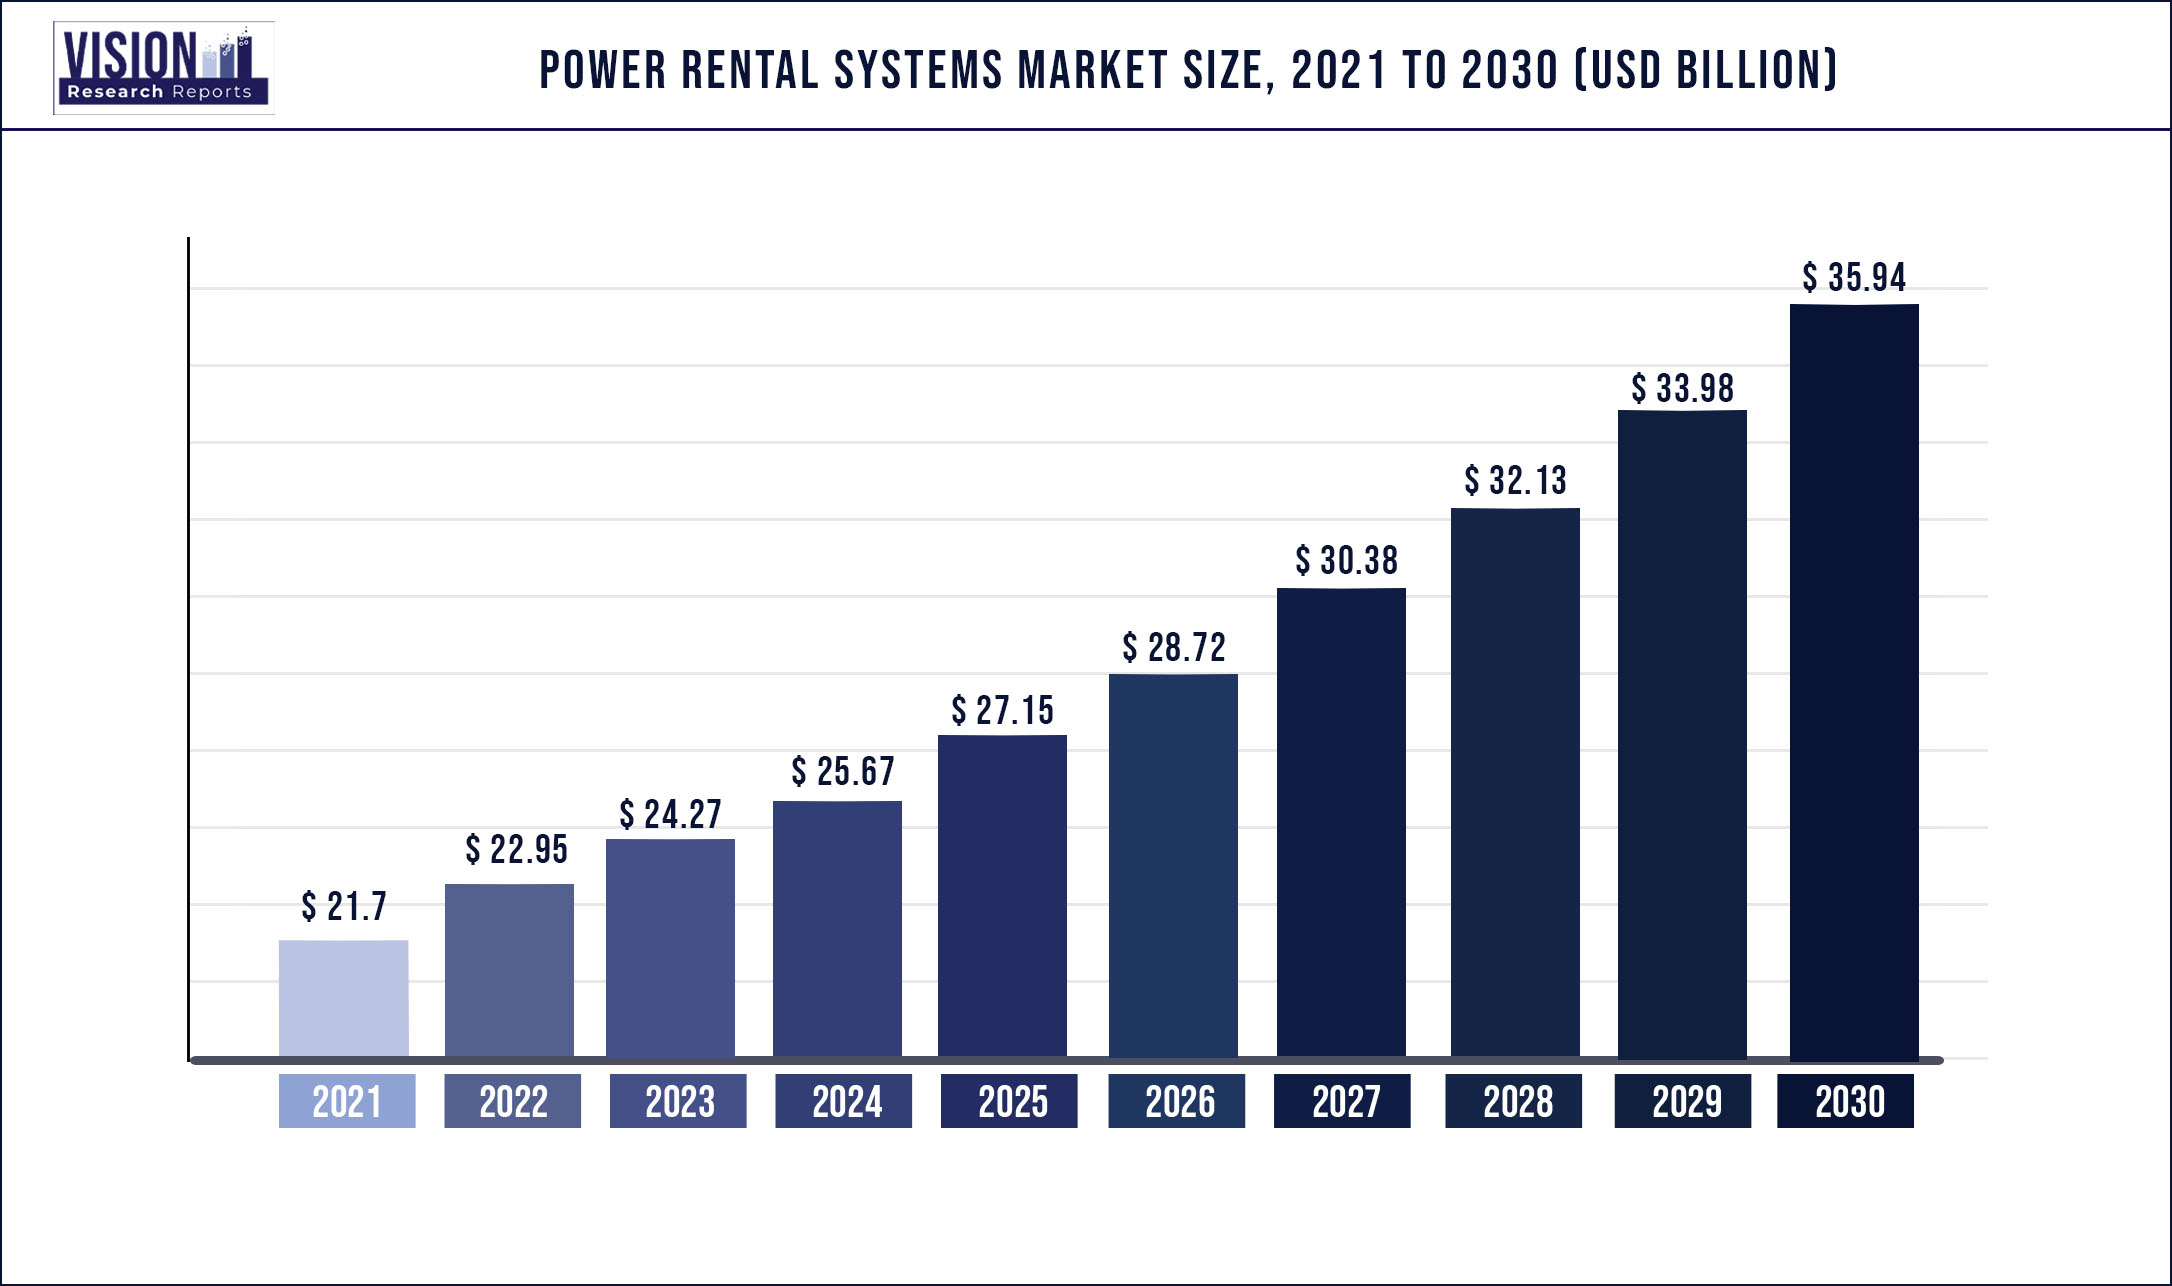 Power Rental Systems Market Size 2021 to 2030